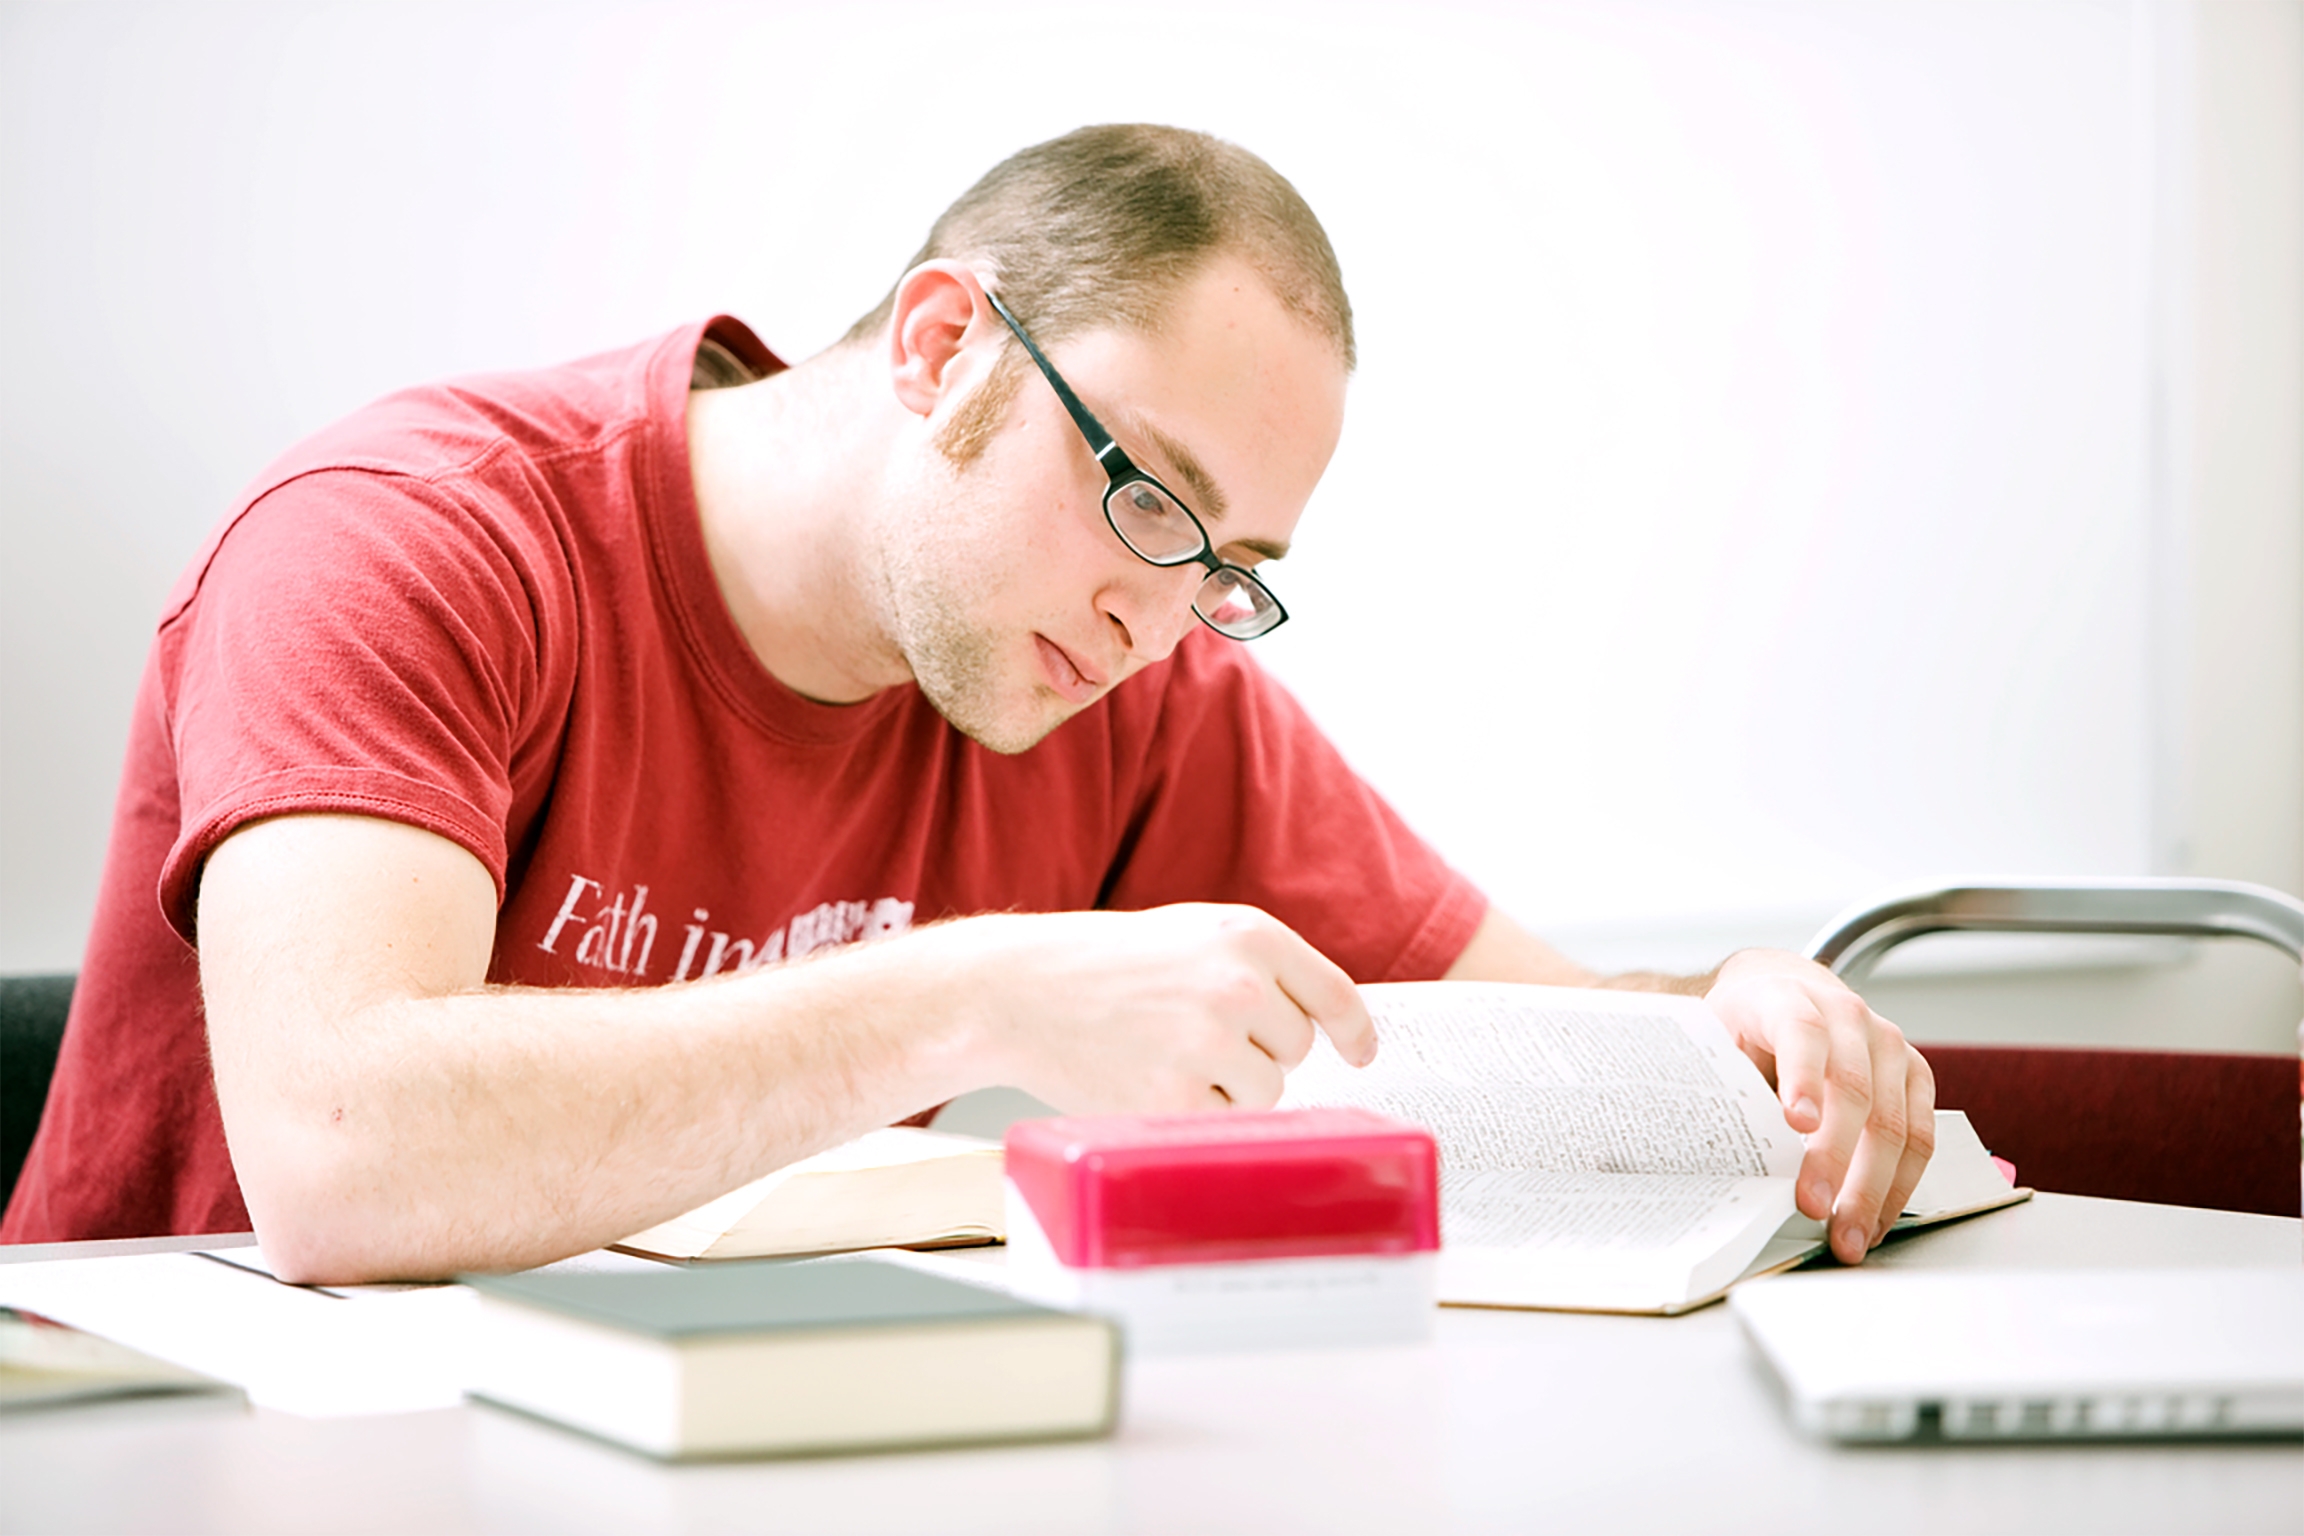 A graduate student in red t-shirt with glasses reading books